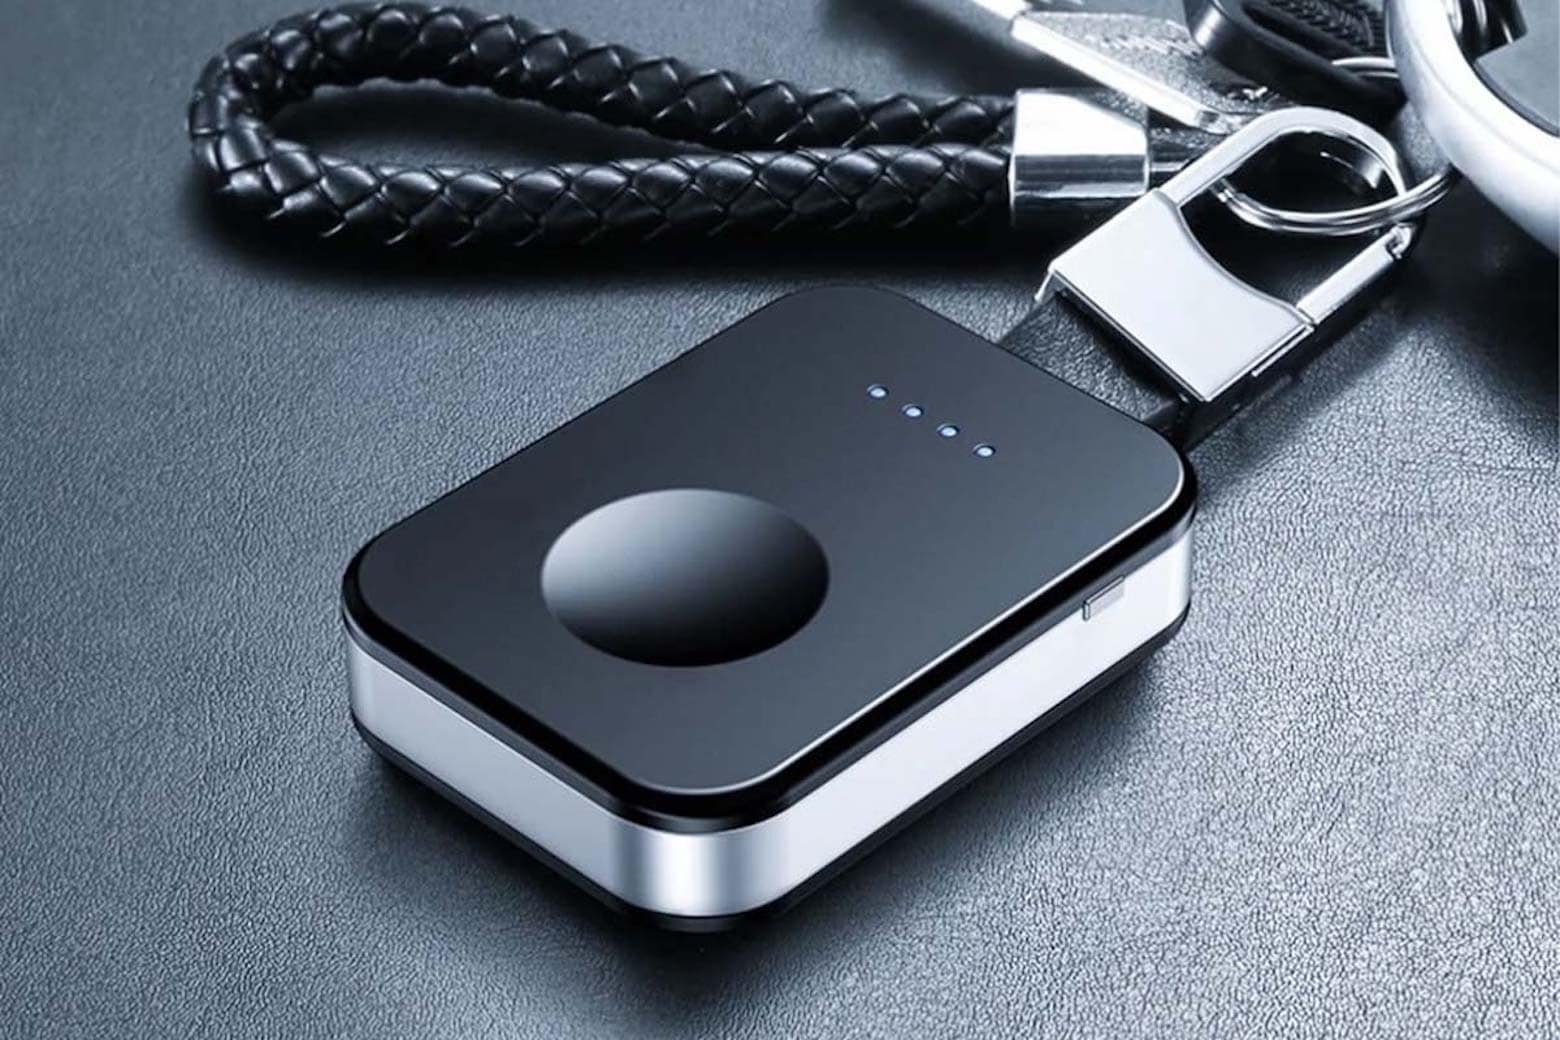 Wireless keychain charger for Apple Watch costs less than $19